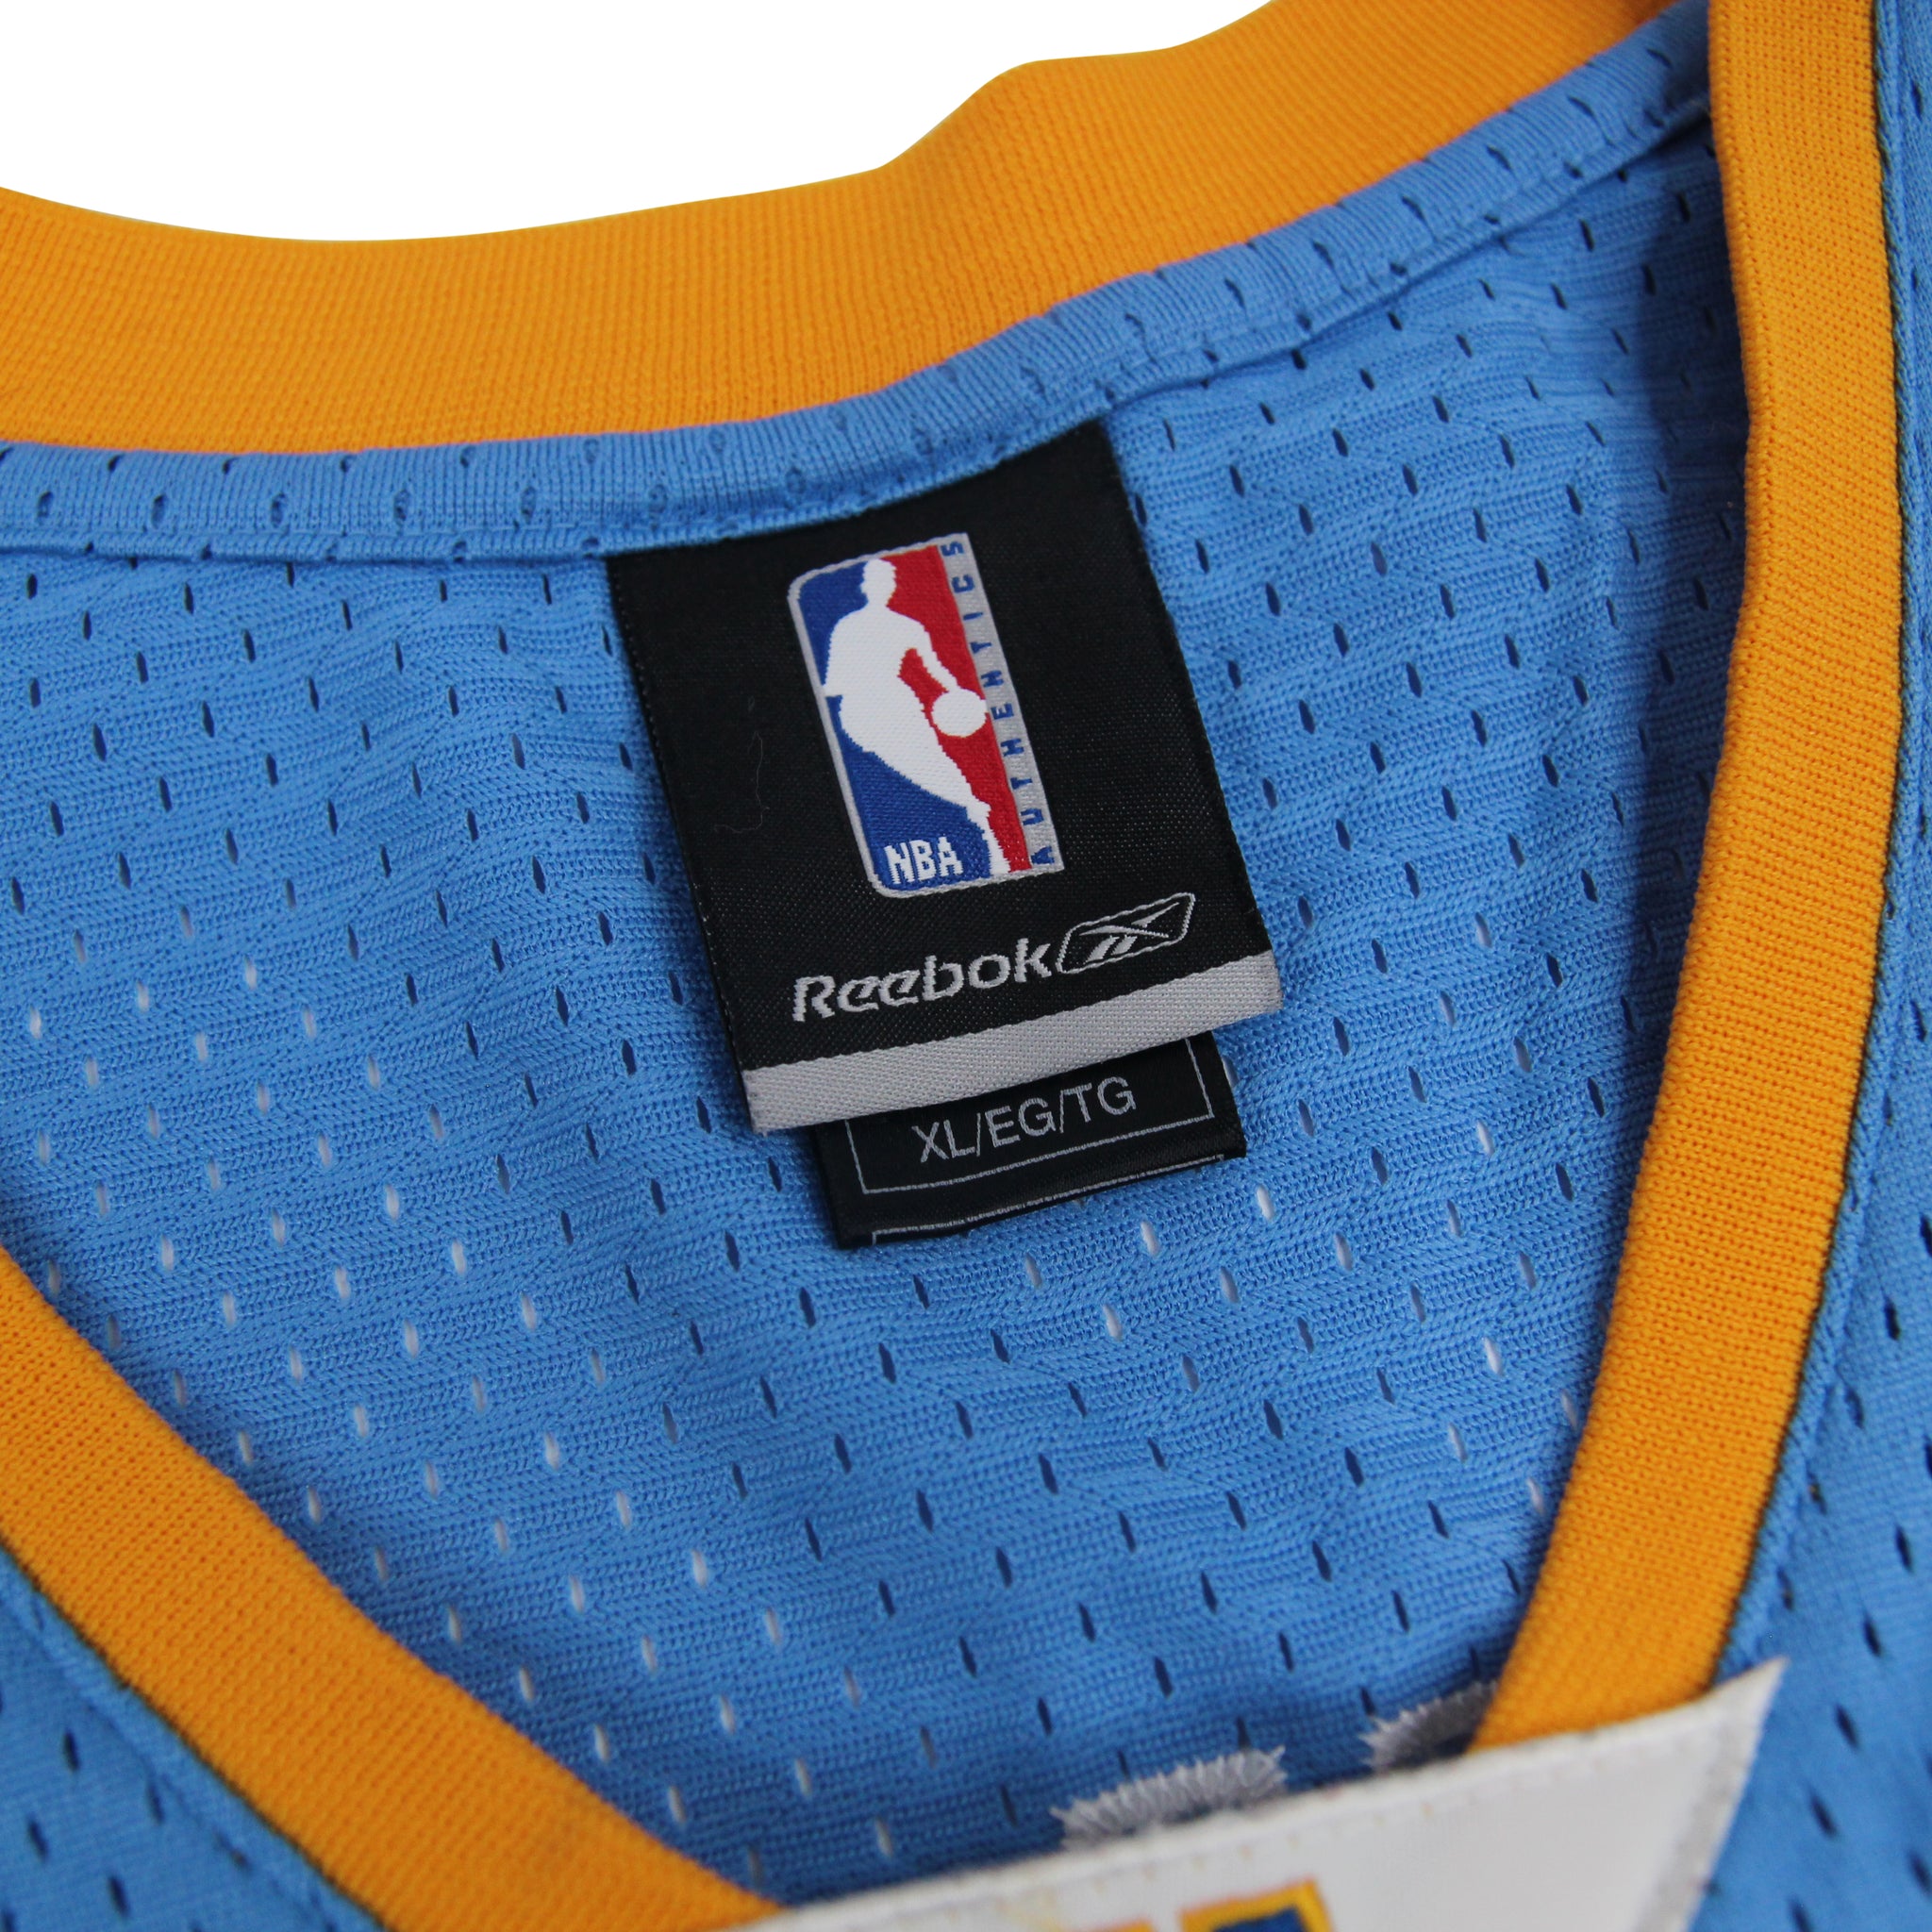 Vintage Denver Nuggets Carmelo Anthony Reebok Basketball Jersey, Size –  Stuck In The 90s Sports